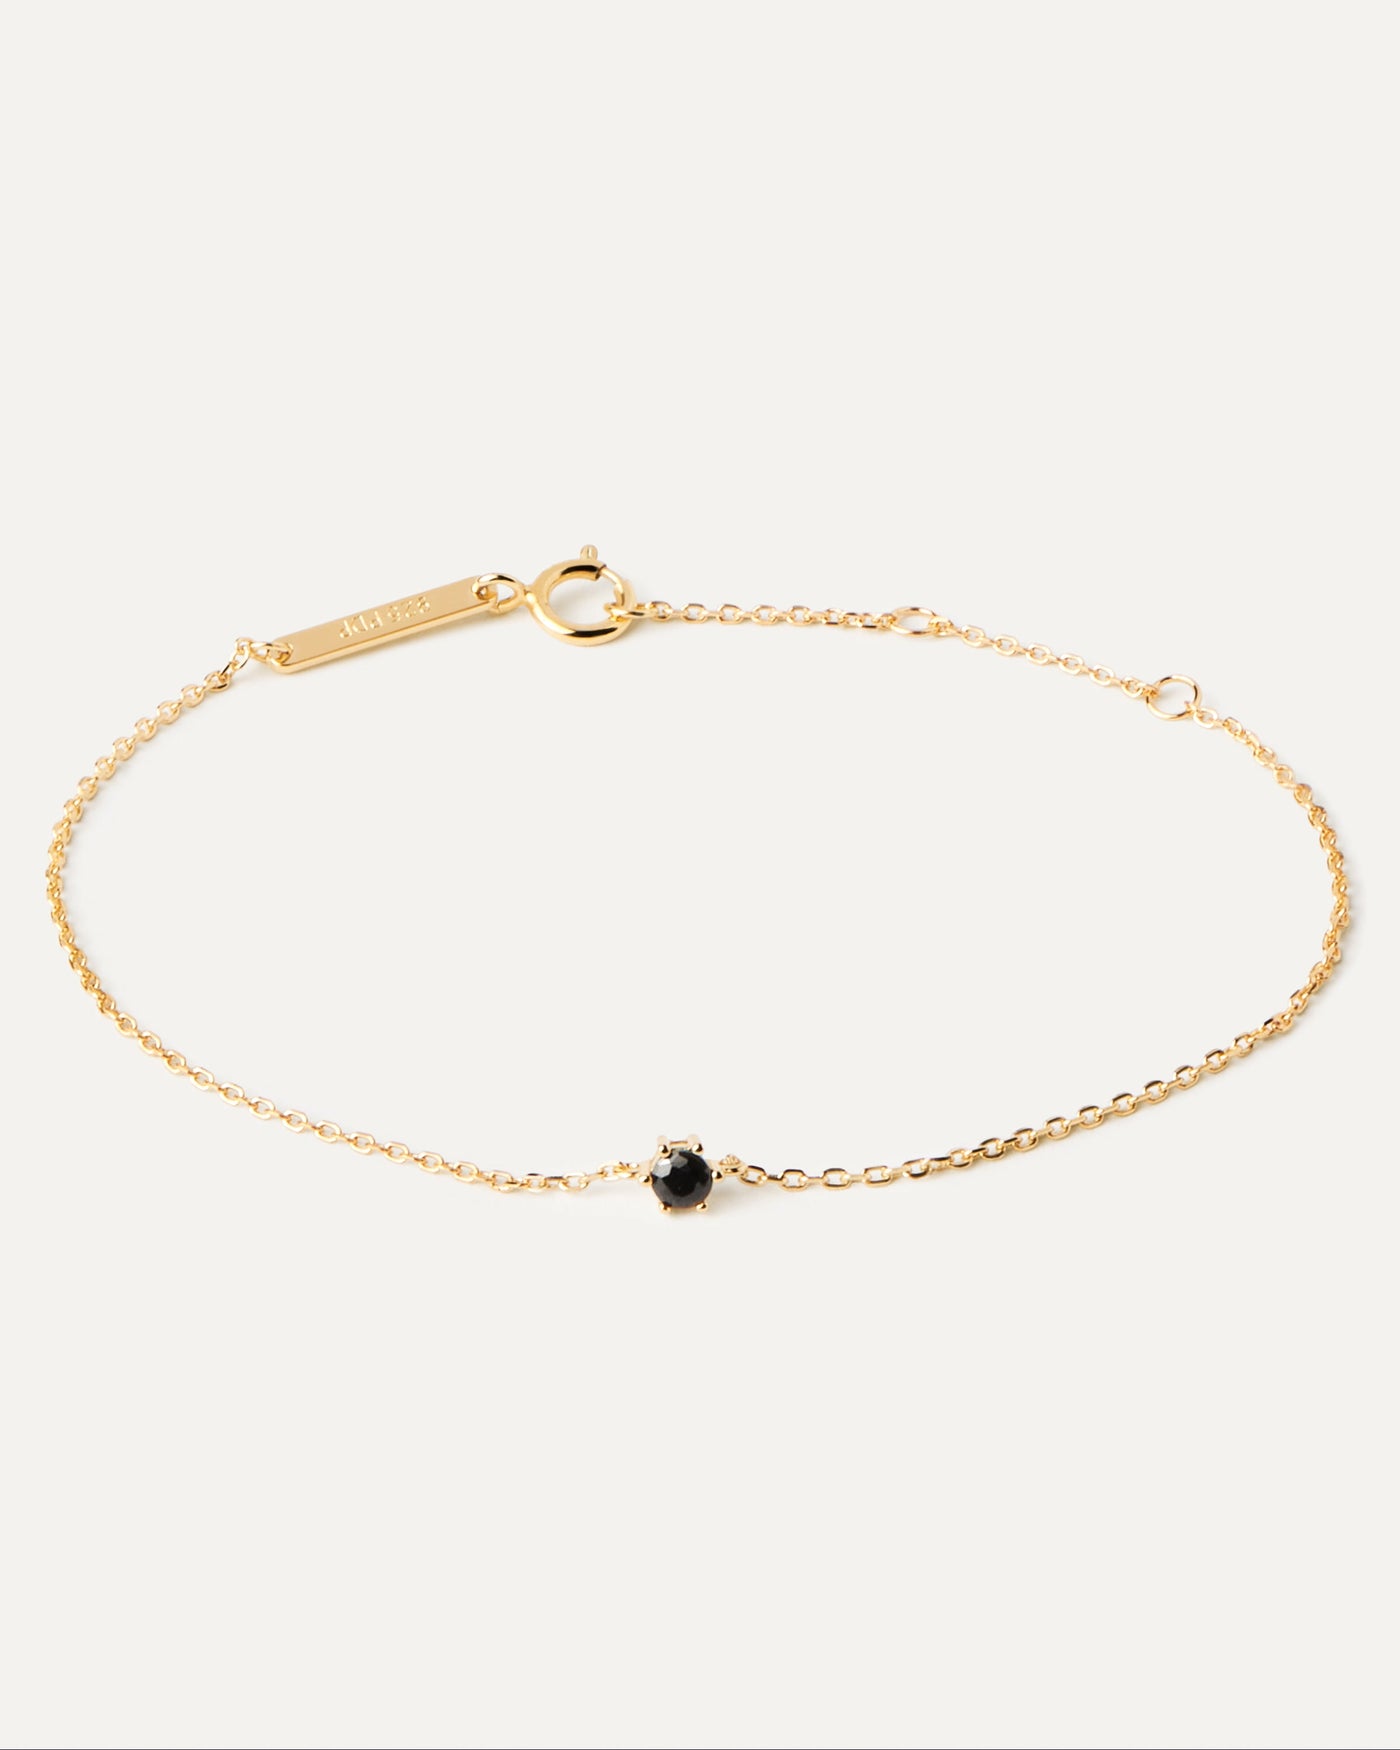 2023 Selection | Black Solitary Bracelet. Thin chain bracelet in 18k gold plated silver and a black zirconia. Get the latest arrival from PDPAOLA. Place your order safely and get this Best Seller. Free Shipping.